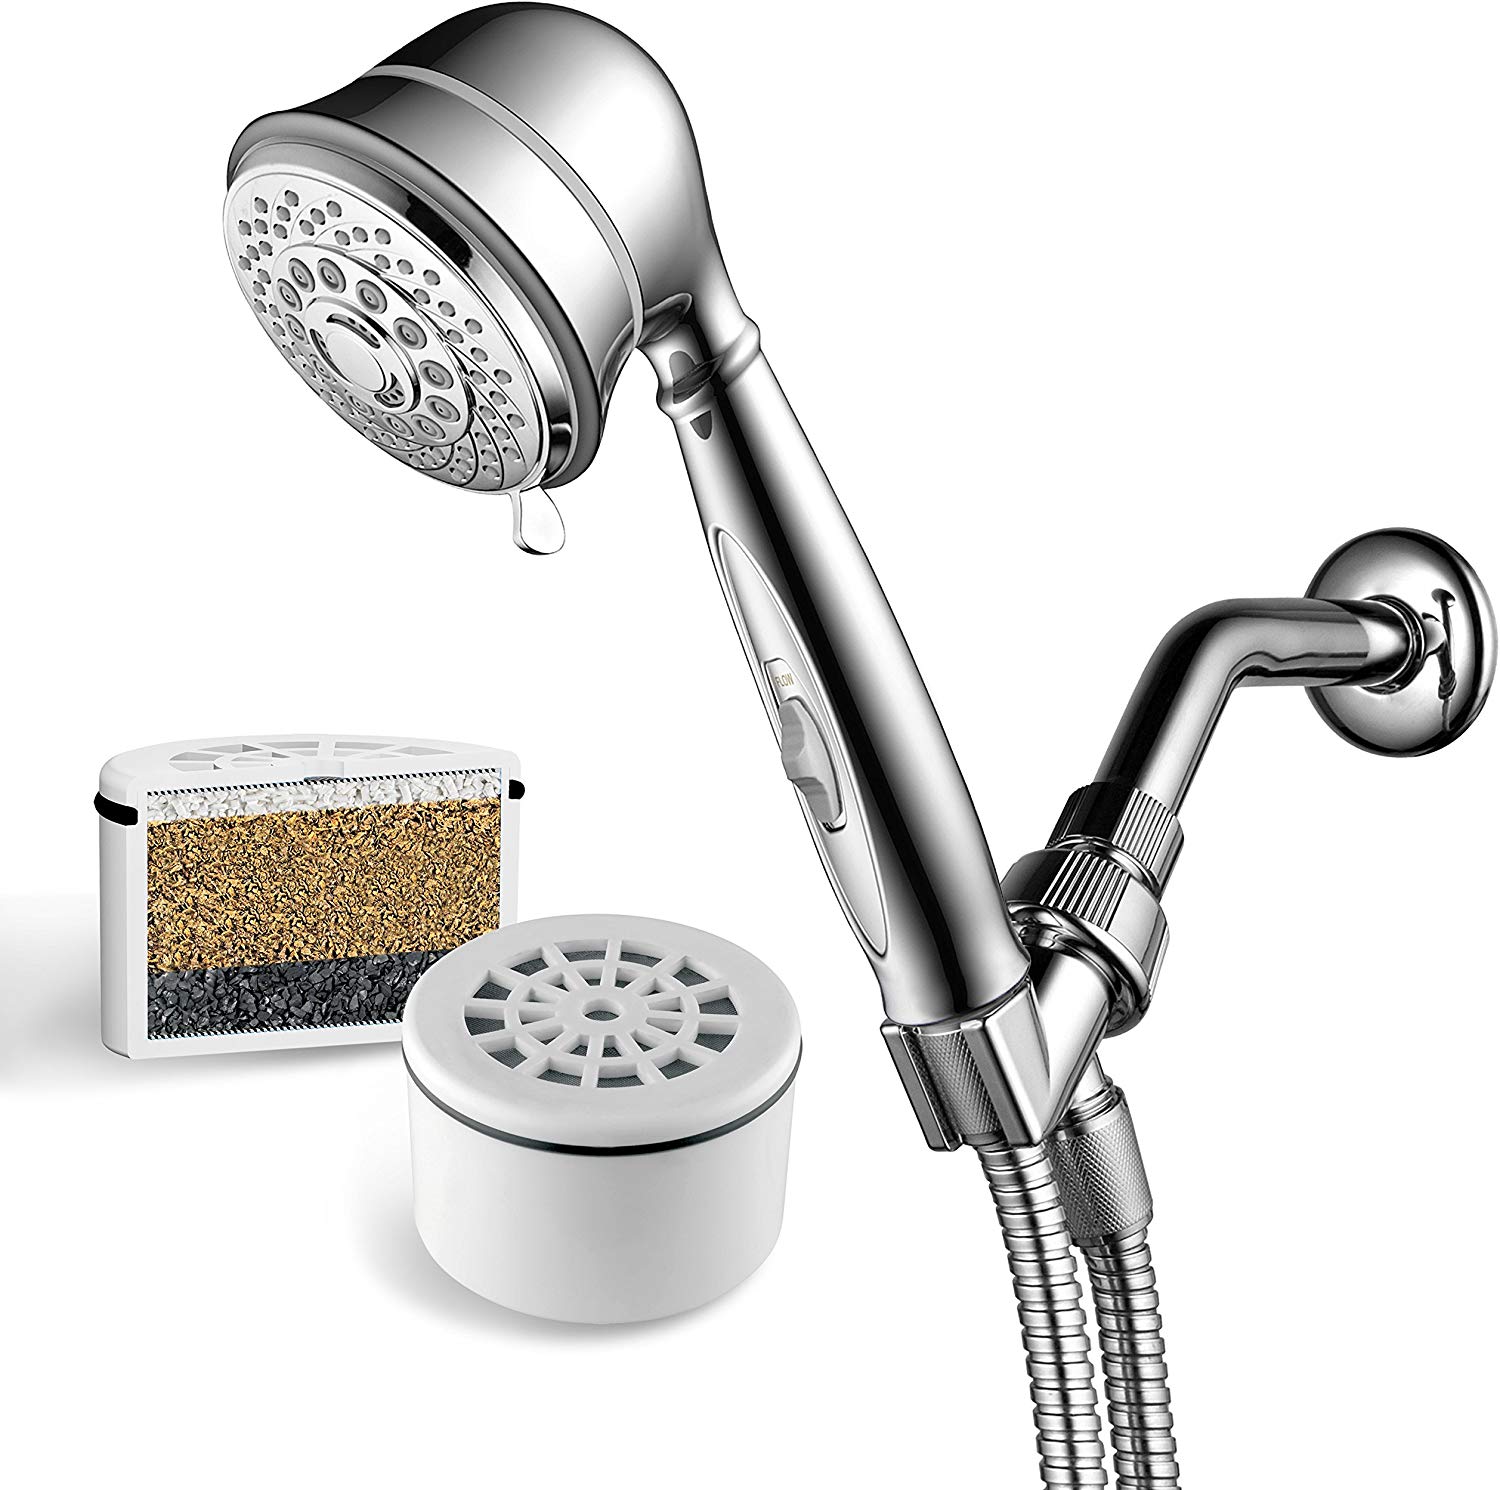 Best Shower Head Filters 33rd Square